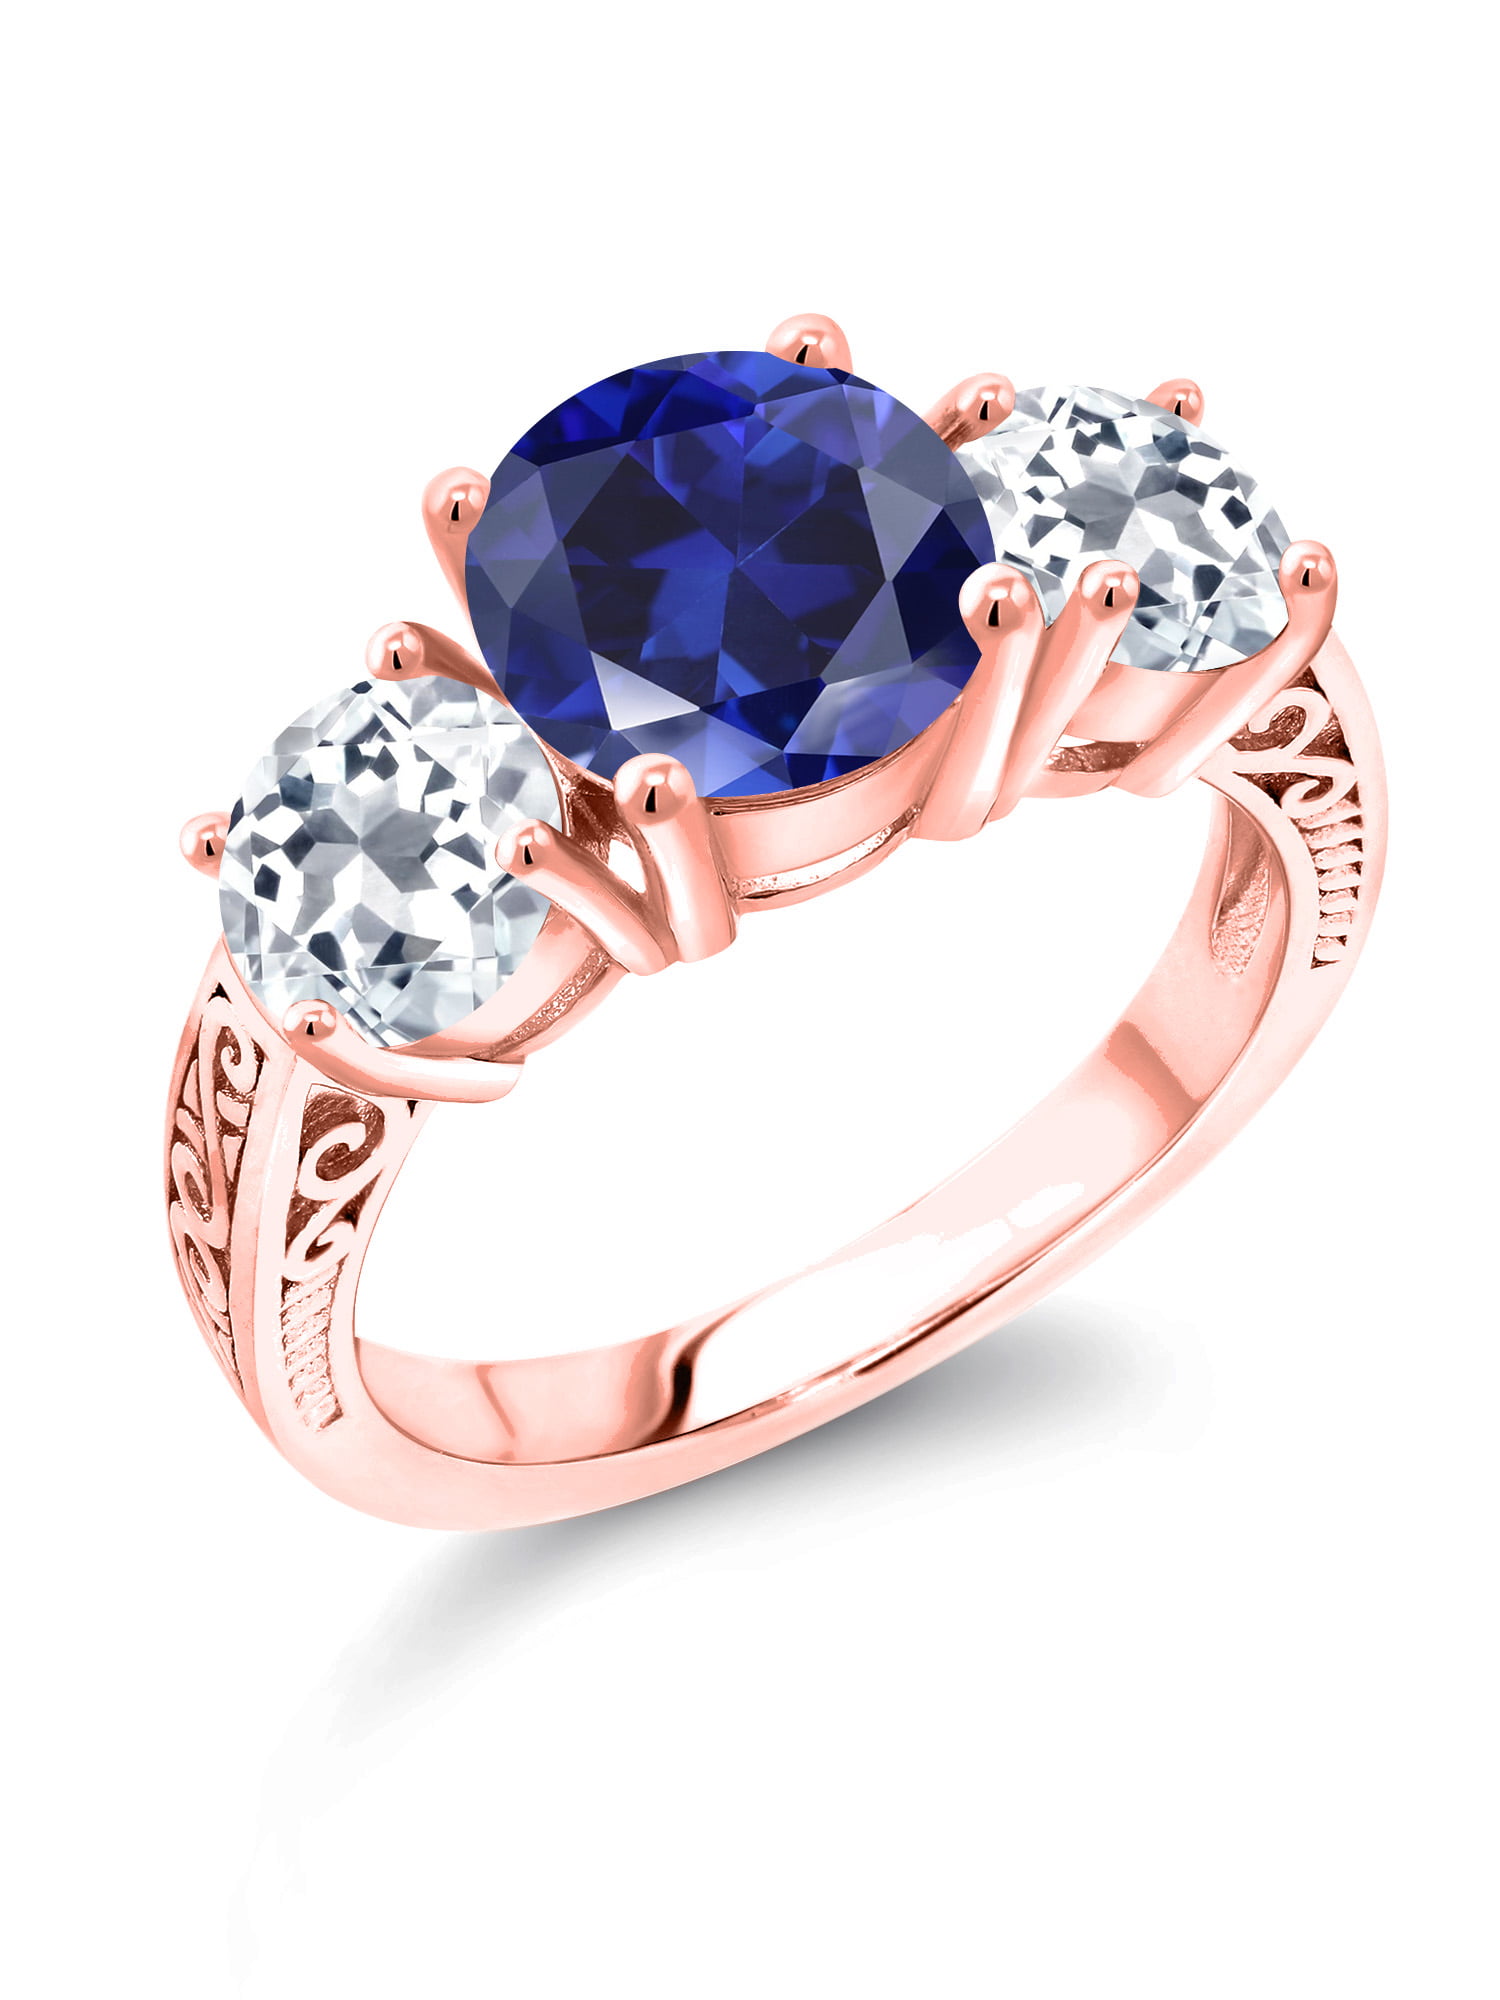 4.30Ct Oval Cut Blue Sapphire Halo Engagement Wedding Ring 14K White Gold Finish 